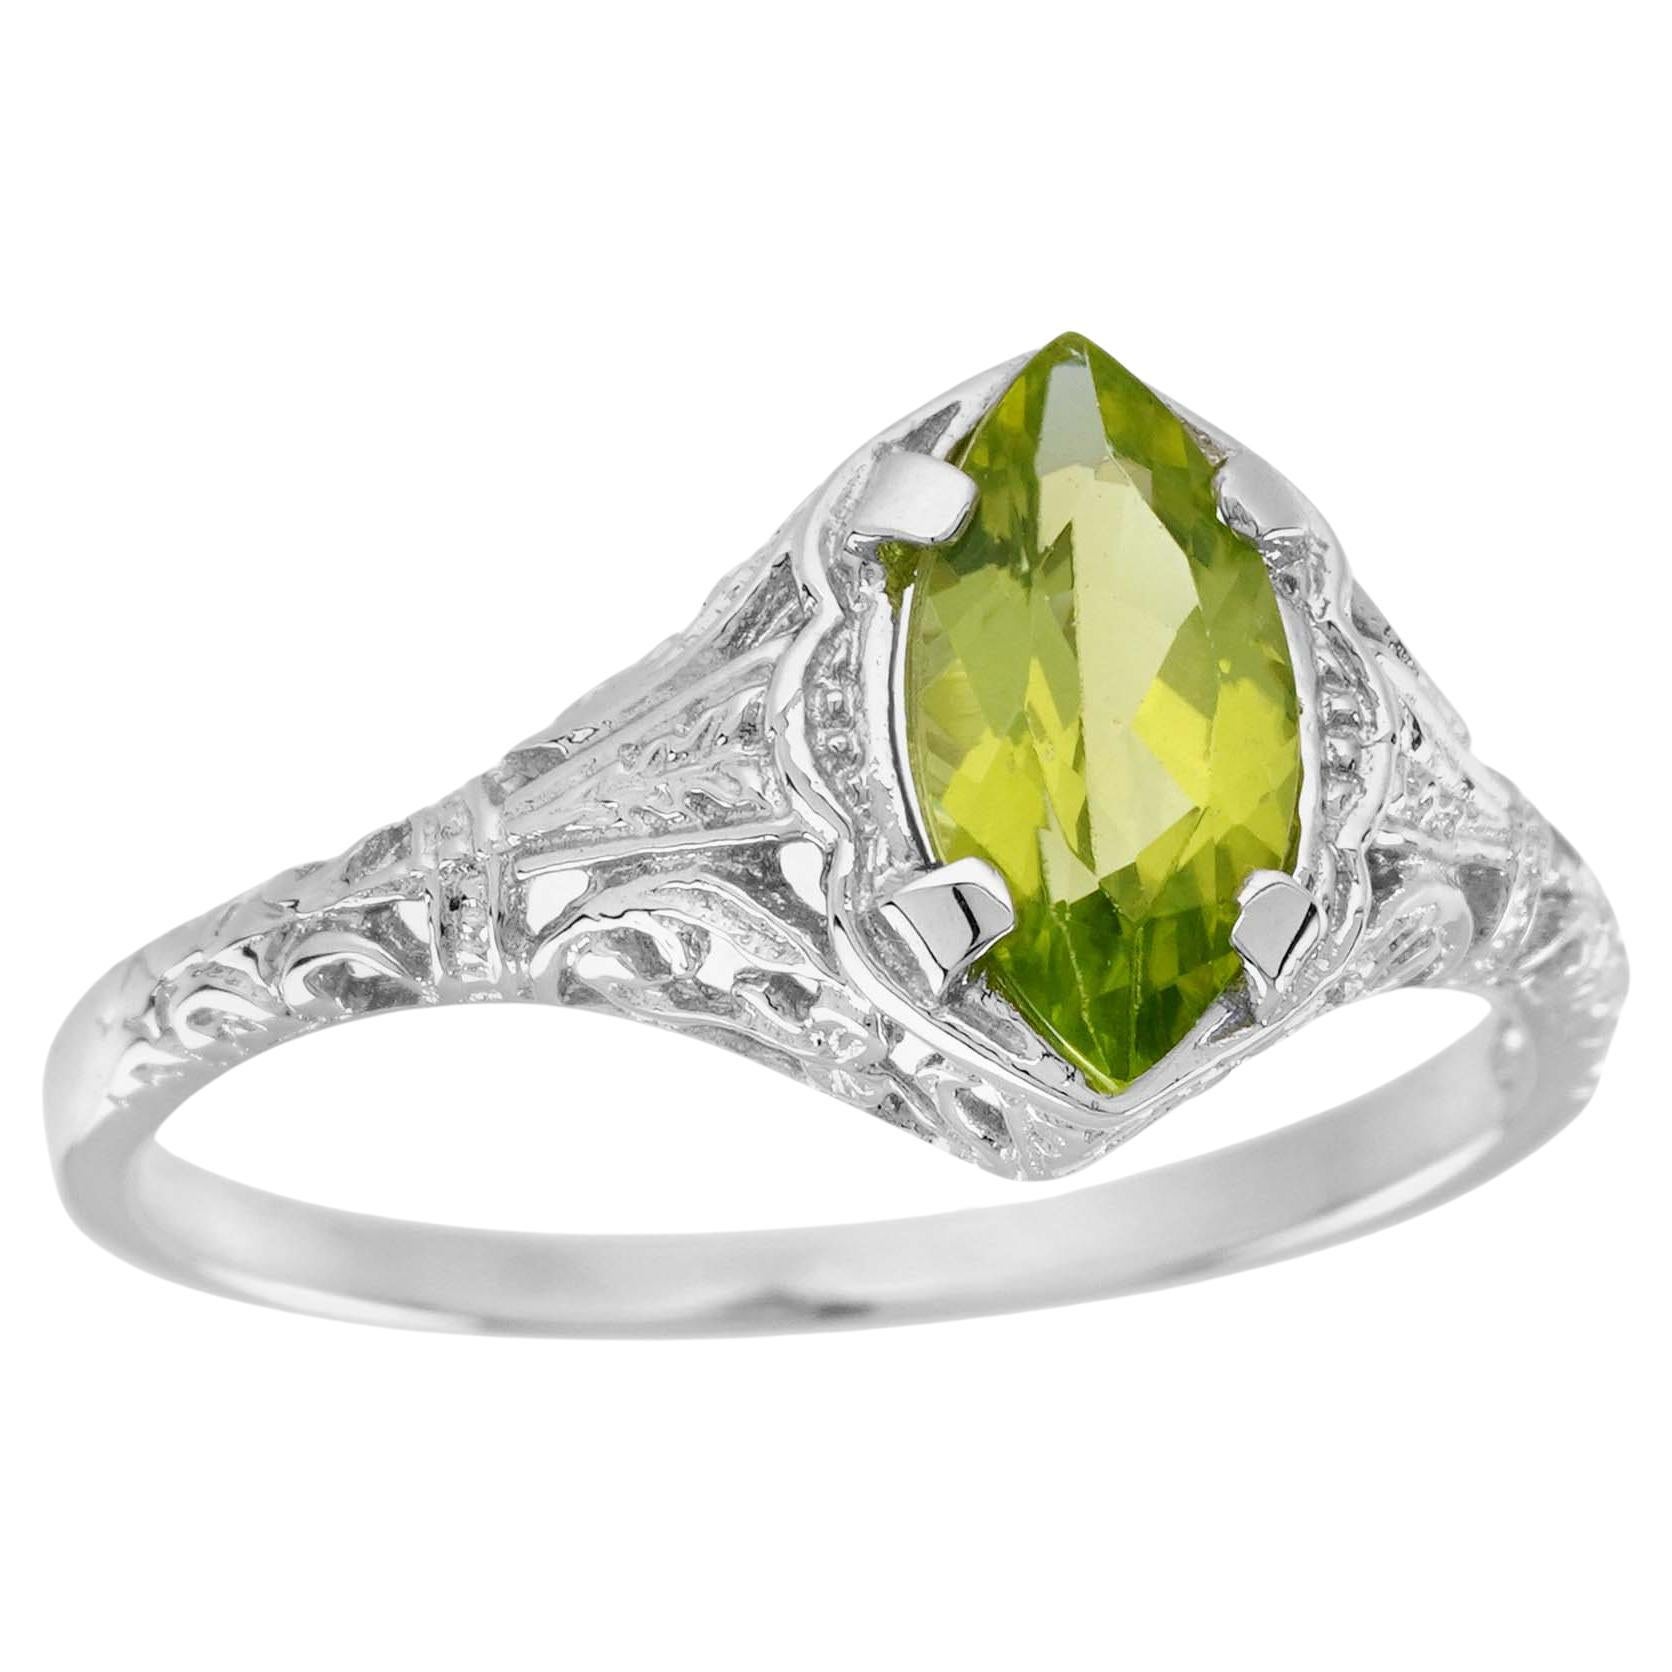 For Sale:  Natural Marquise Peridot Vintage Style Filigree Ring in Solid 9K White Gold